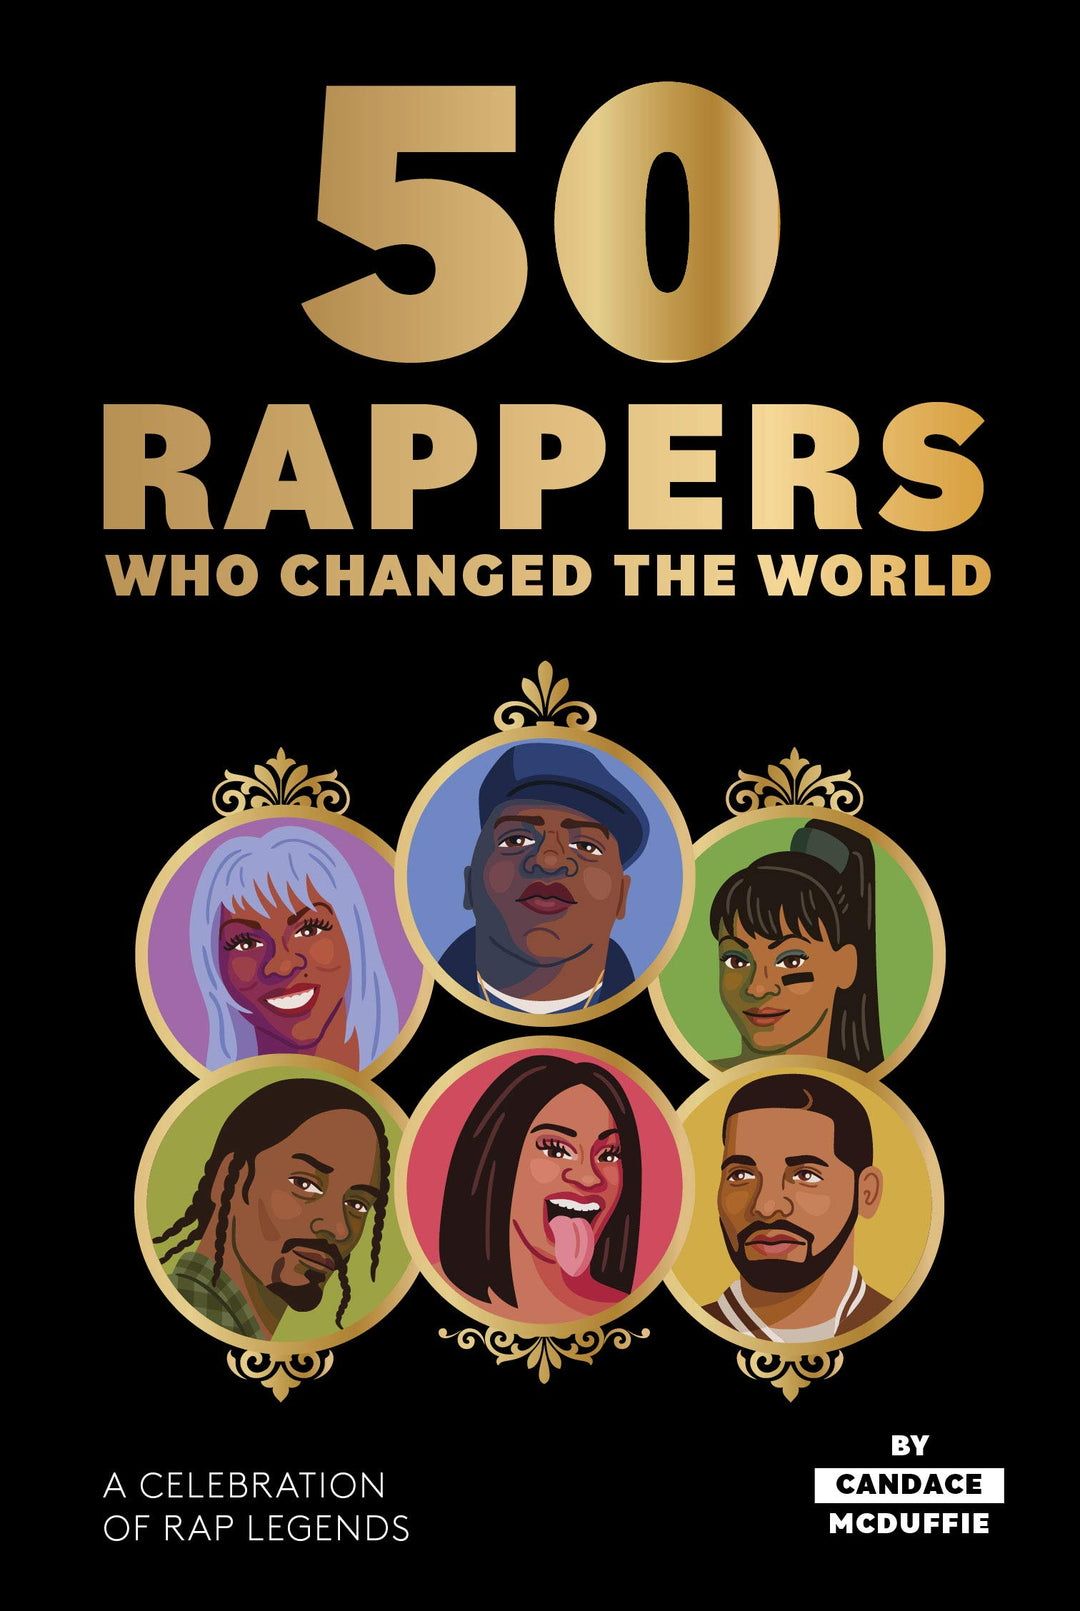 50 RAPPERS WHO CHANGED THE WORLD - Kingfisher Road - Online Boutique